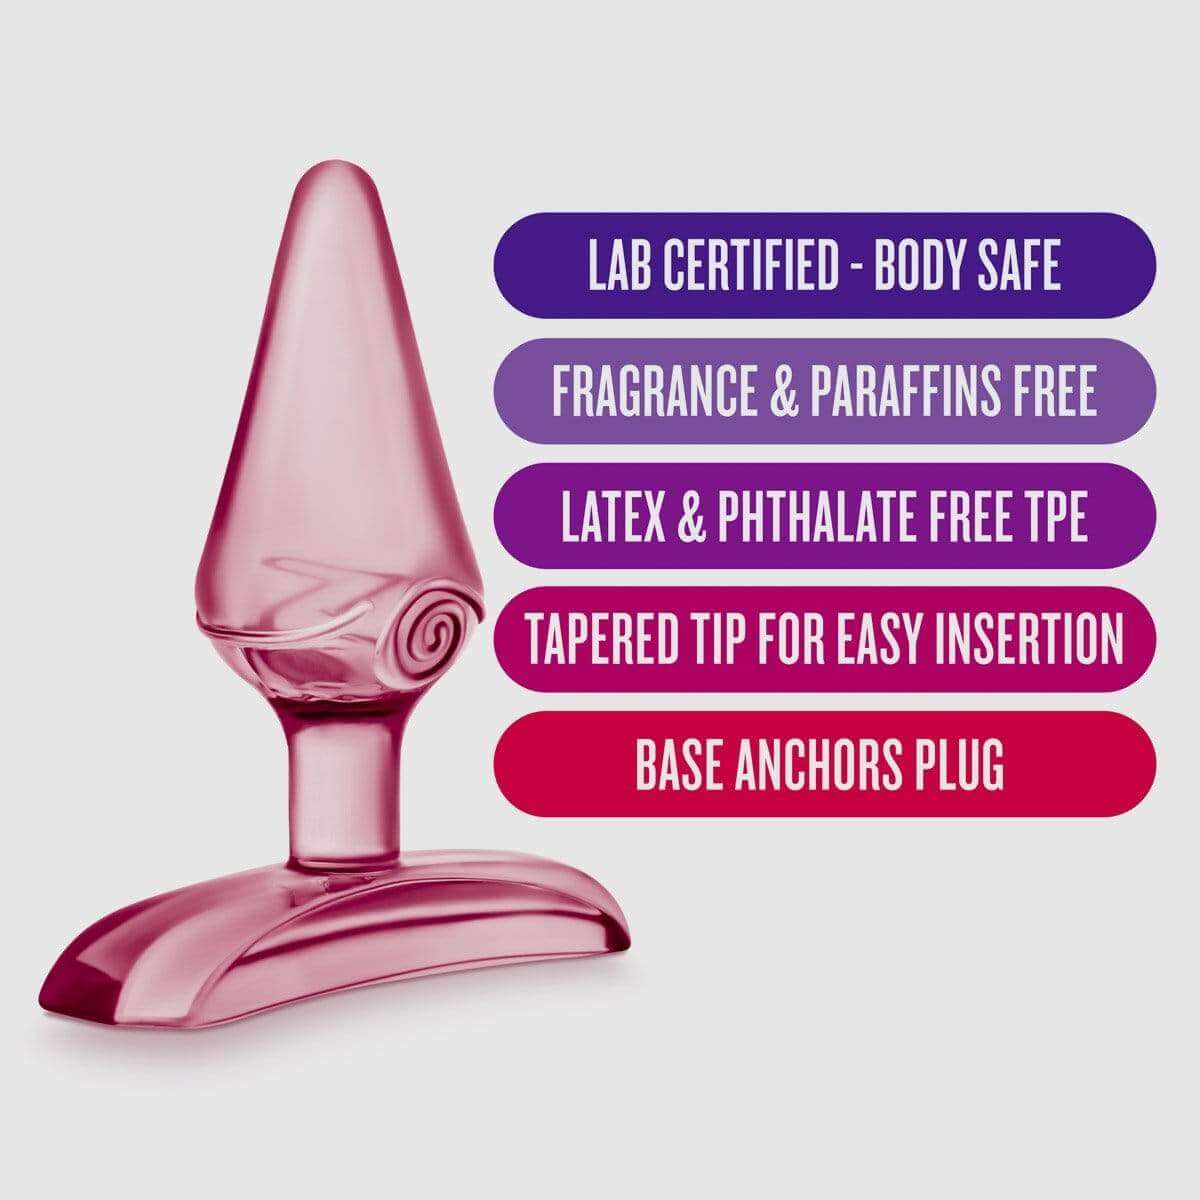 Play With Me Hard Candy Anal Butt - Pink - Thorn & Feather Sex Toy Canada